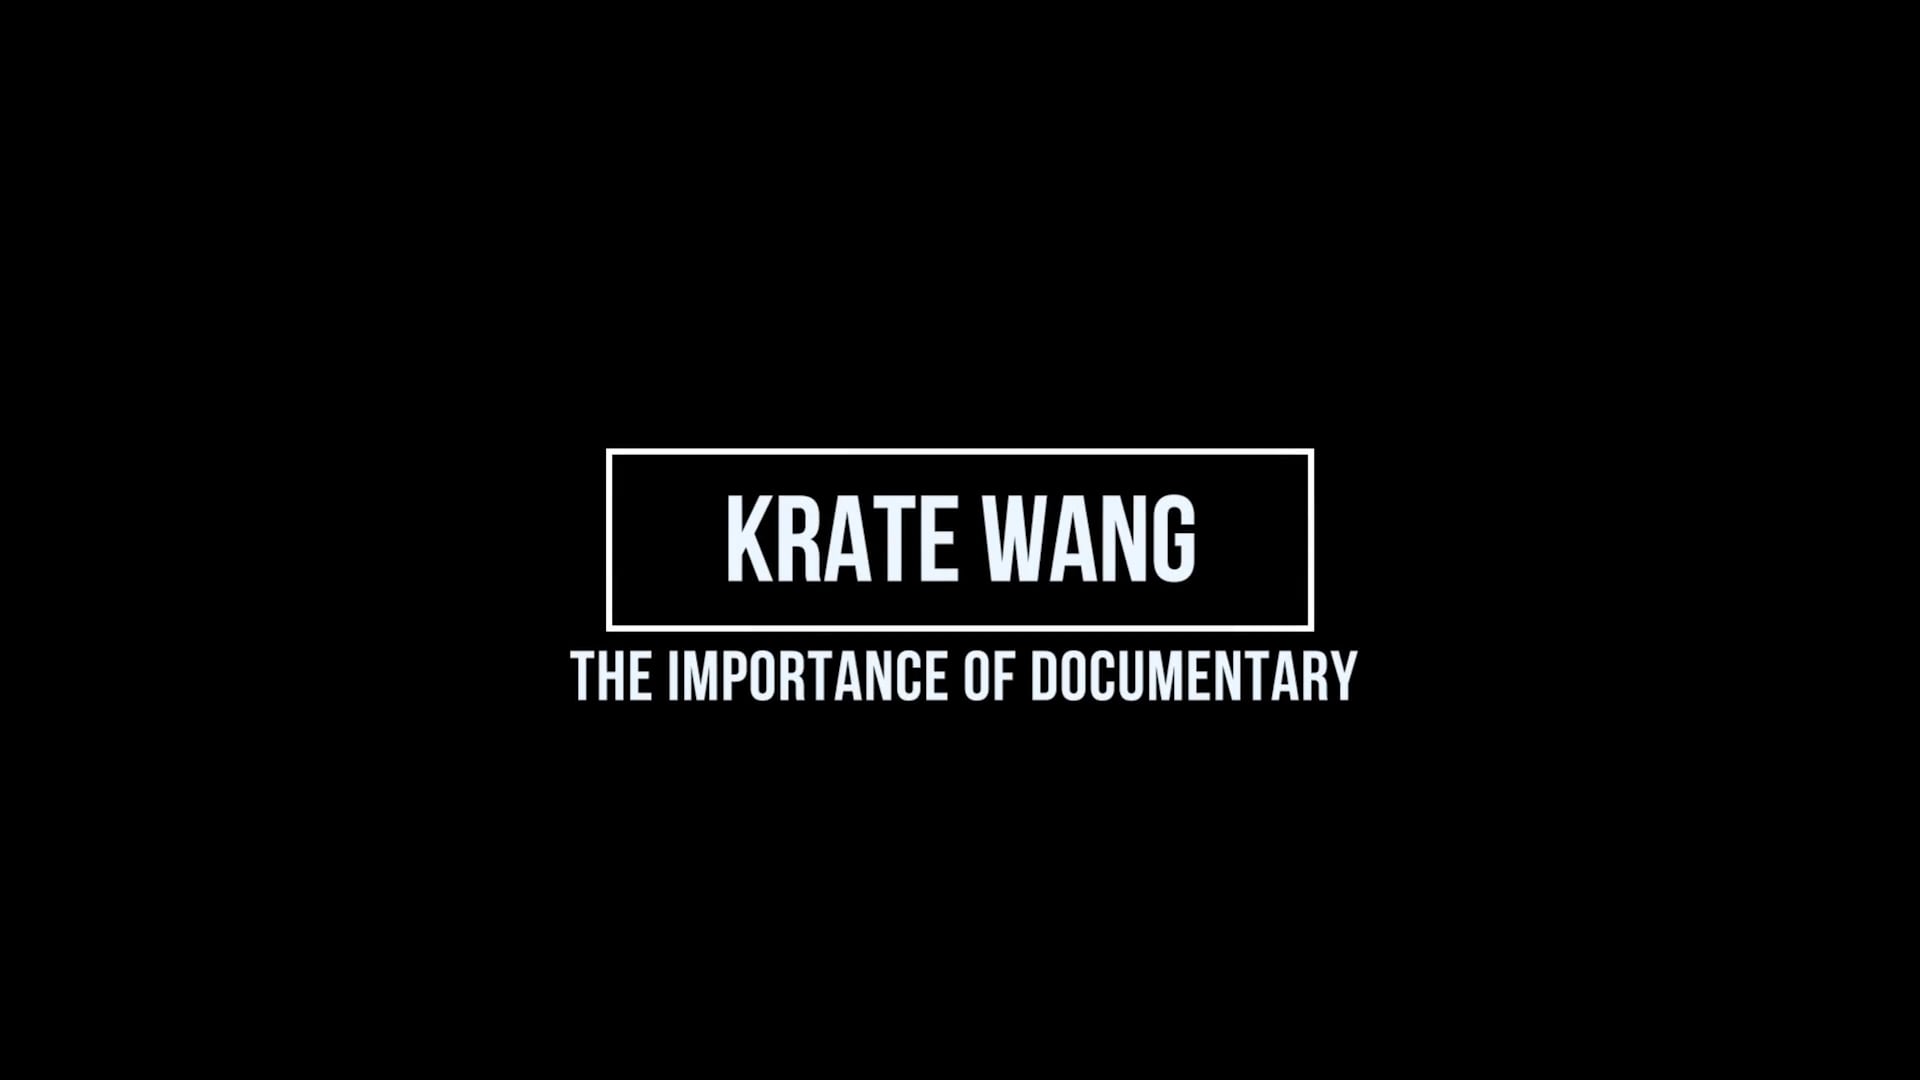 Krate Wang - The importance of documentary